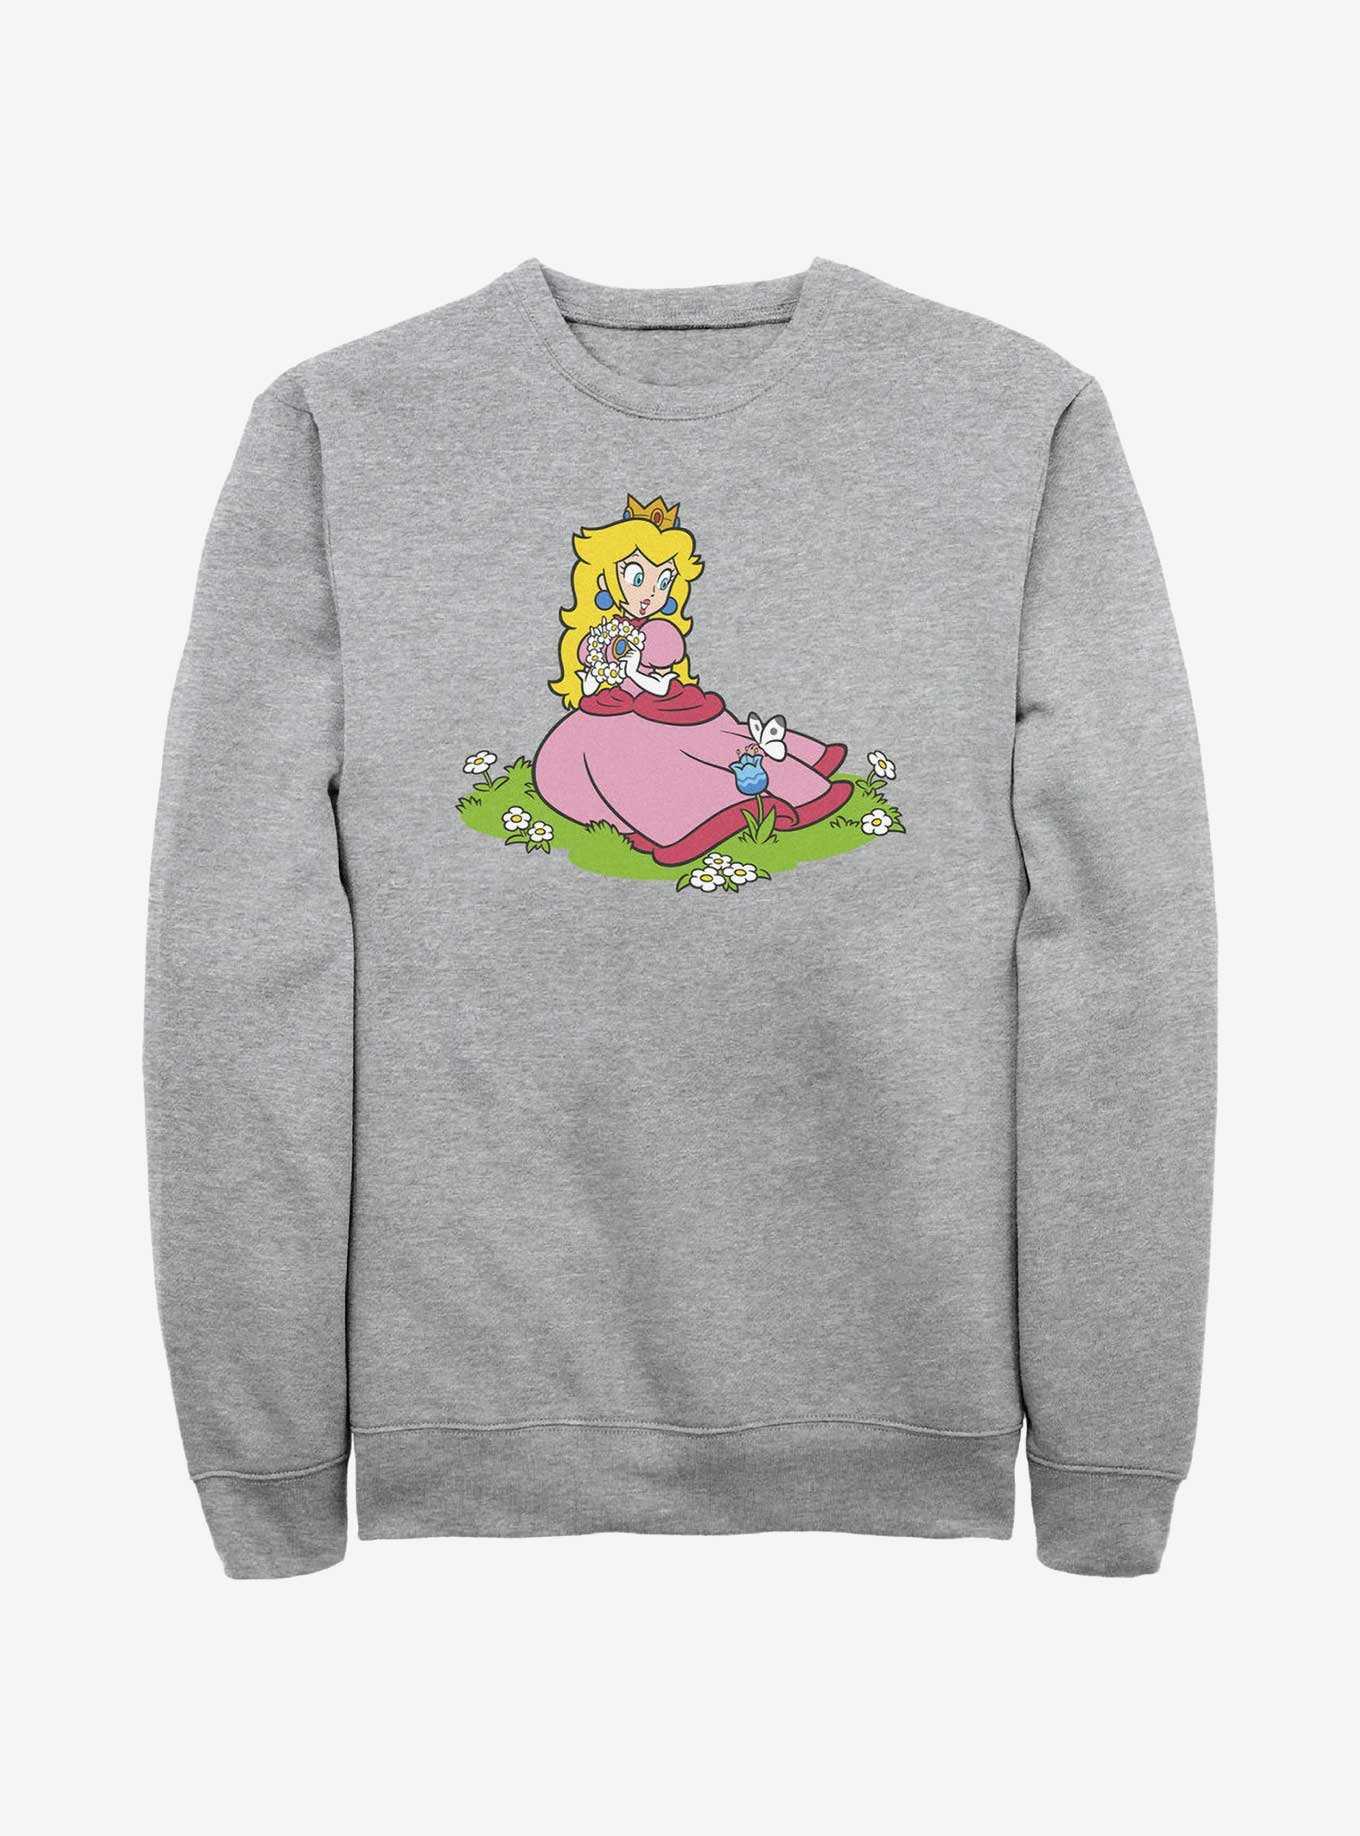 Nintendo Peach And A Butterfly Sweatshirt, , hi-res